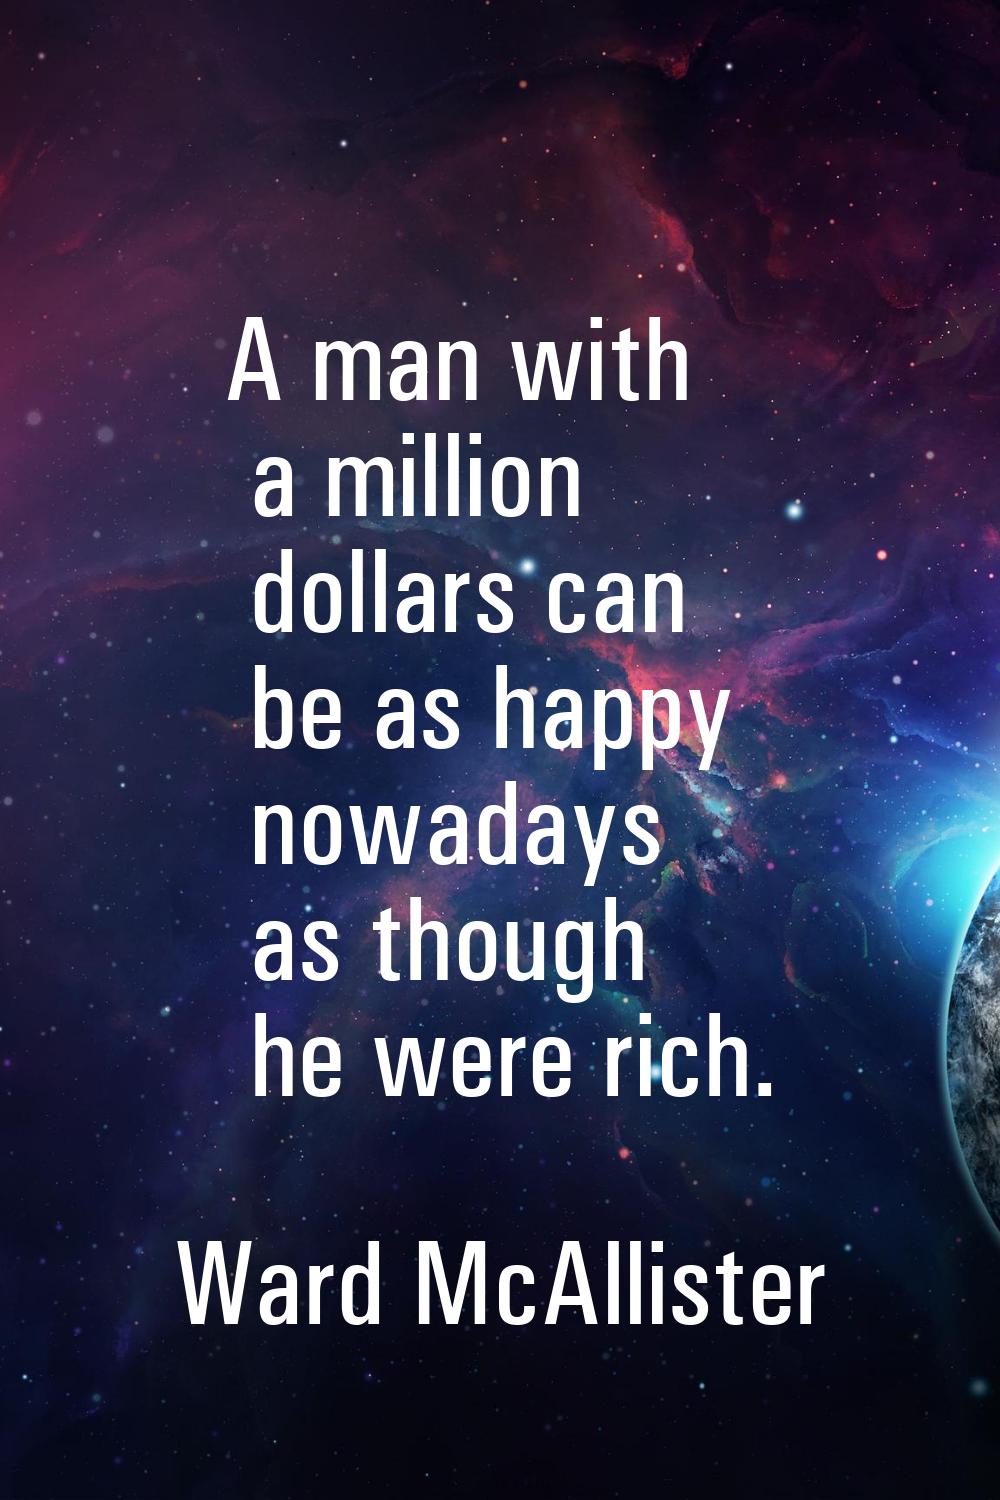 A man with a million dollars can be as happy nowadays as though he were rich.